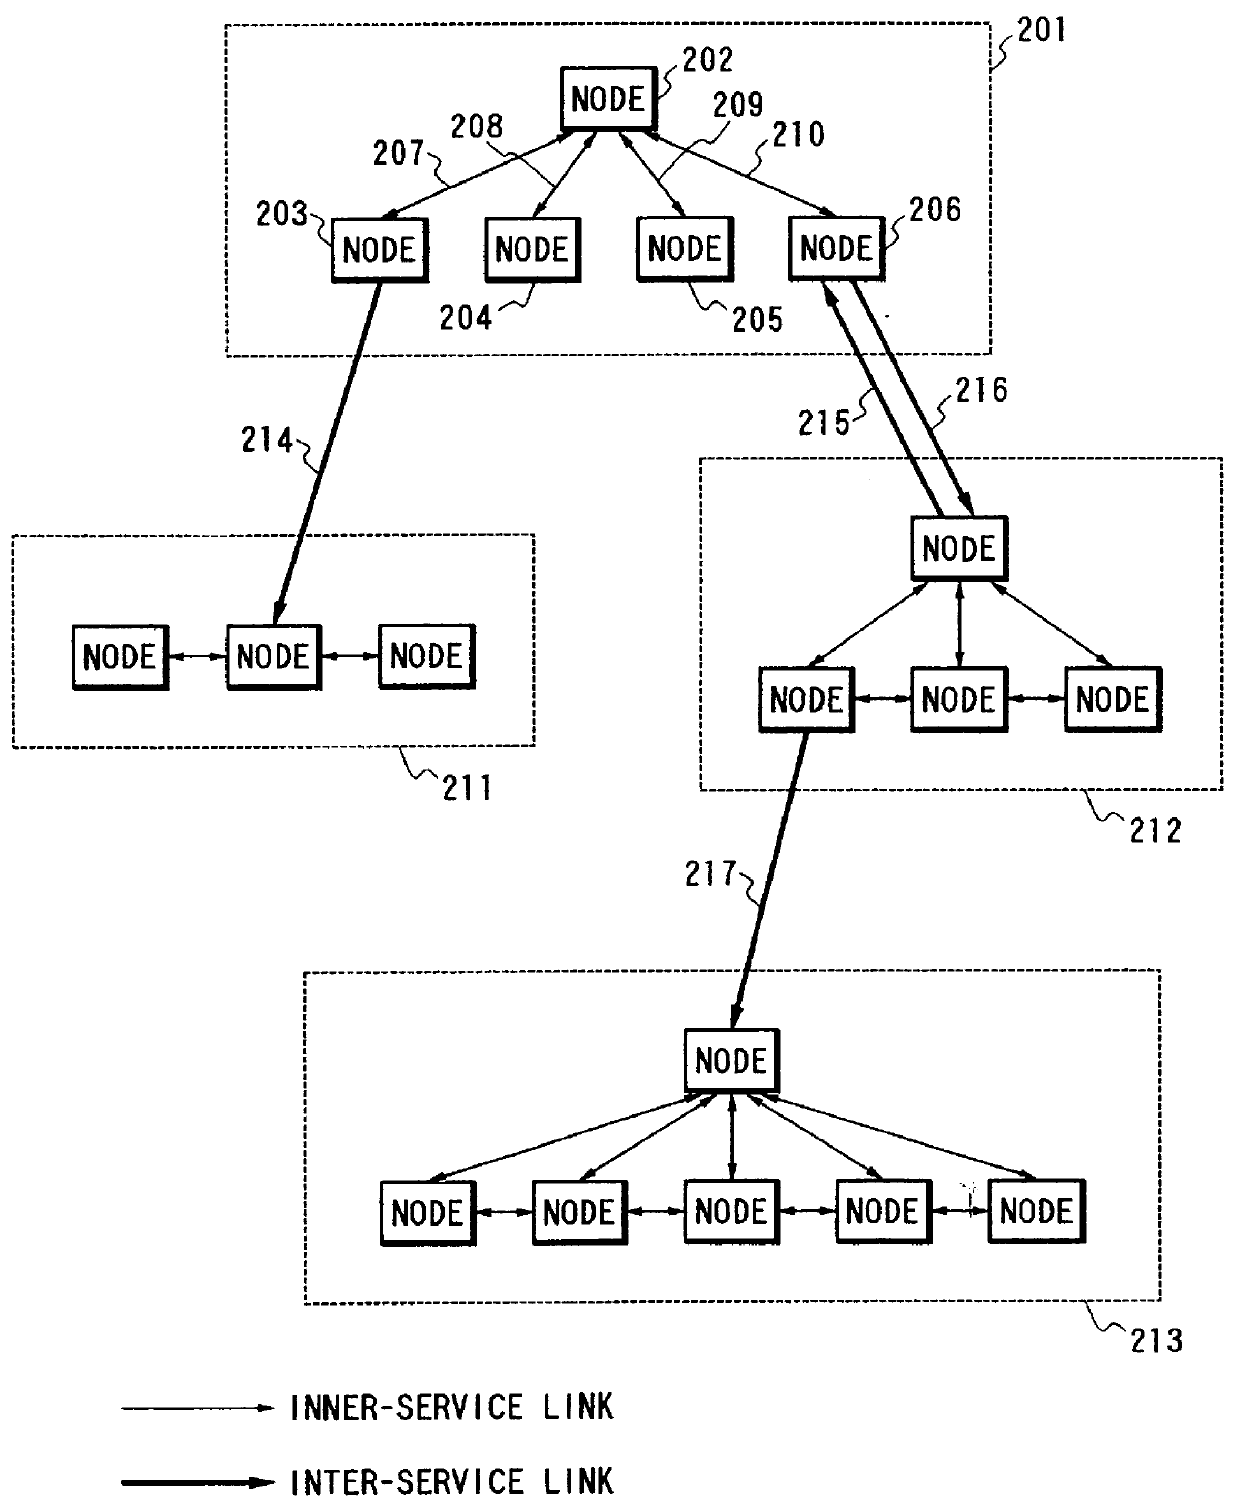 Apparatus for preparing a hyper-text document of pieces of information having reference relationships with each other